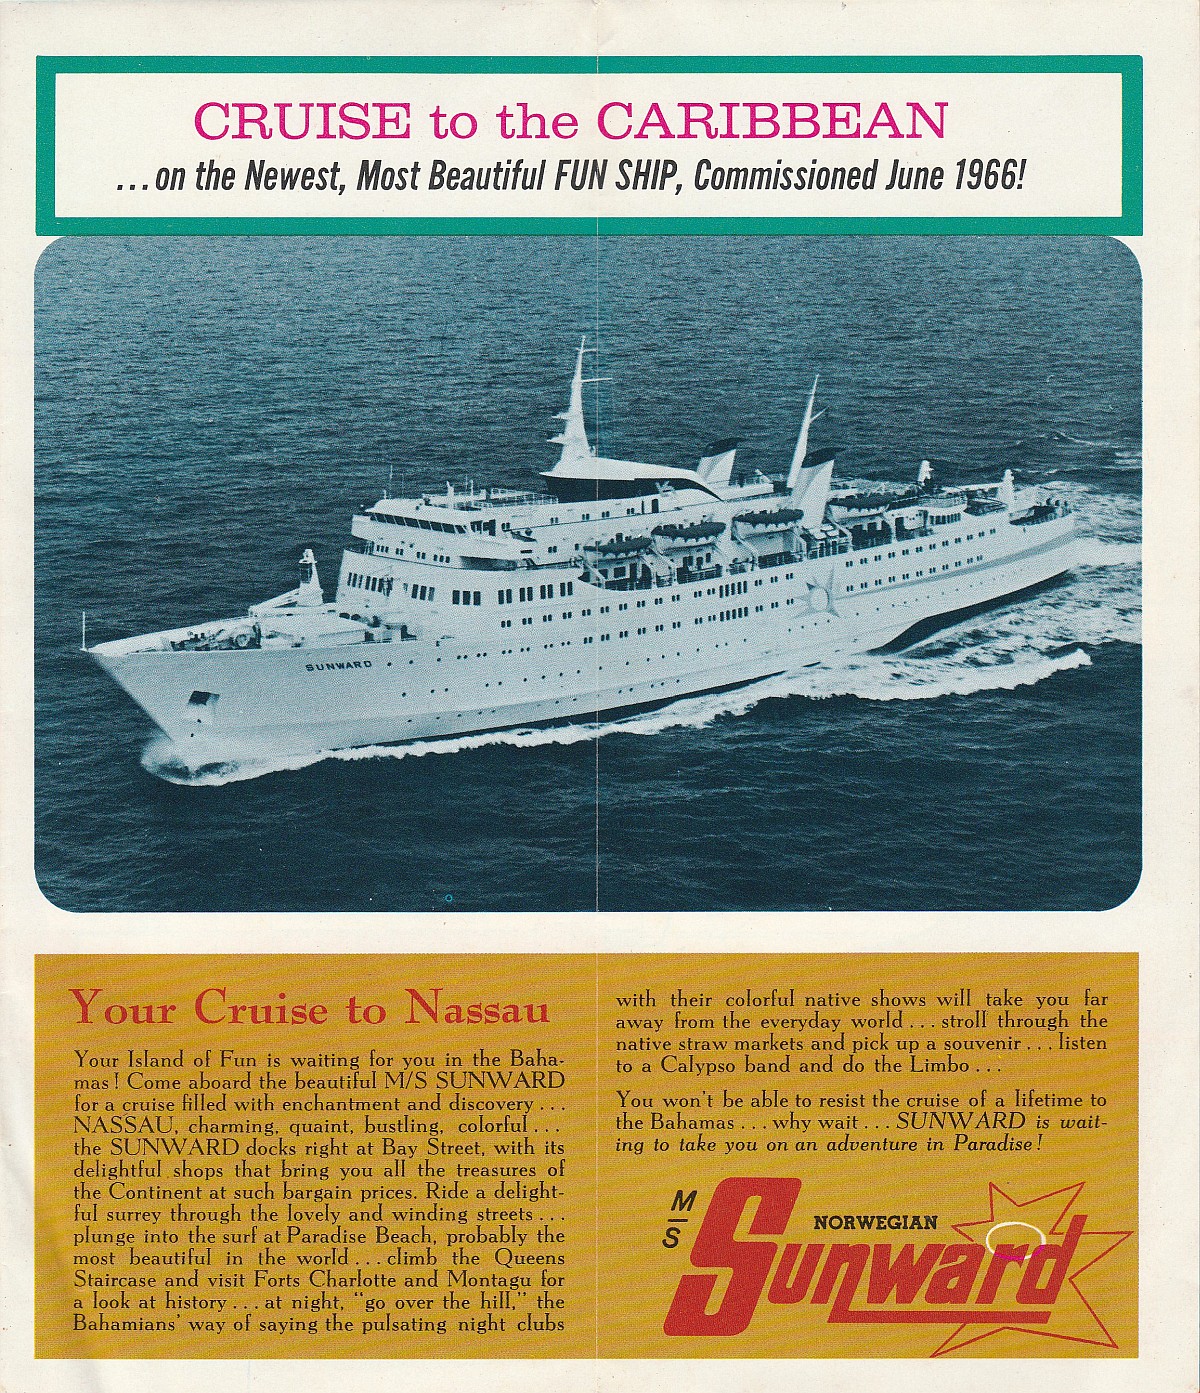 ms Sunward Your cruise to Nassau: Your island of fun is waiting for you in the Bahamas!